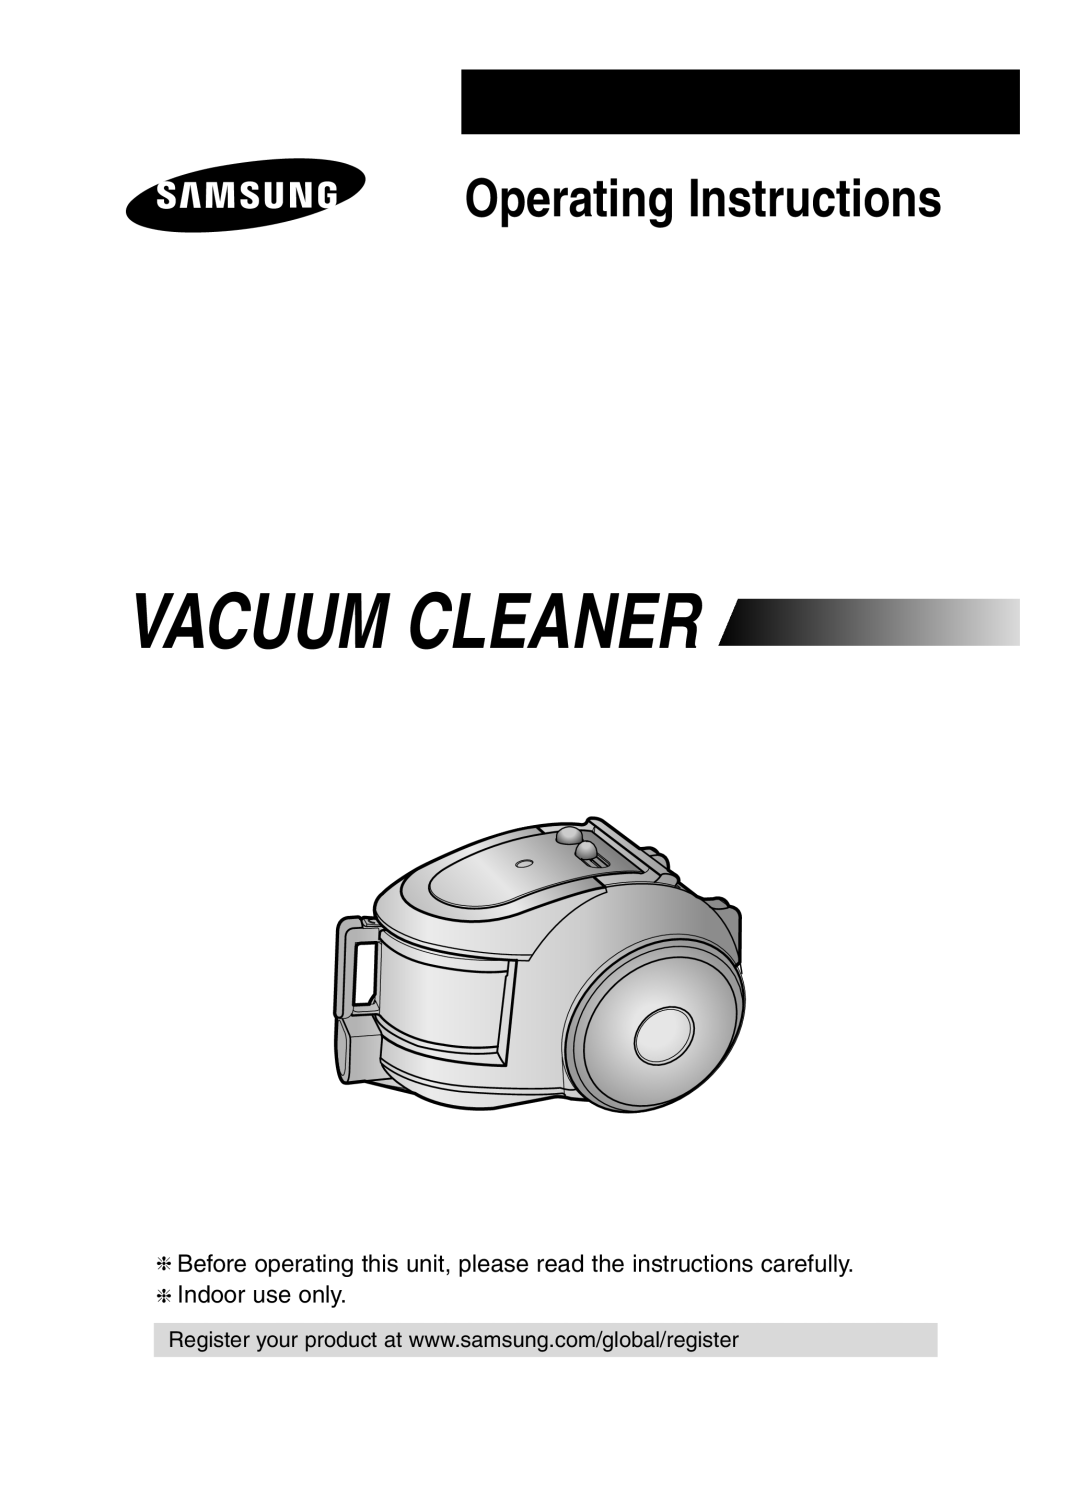 Samsung SC65A1, DJ68-00339U manual Indoor use only, Vacuum Cleaner, Operating Instructions 